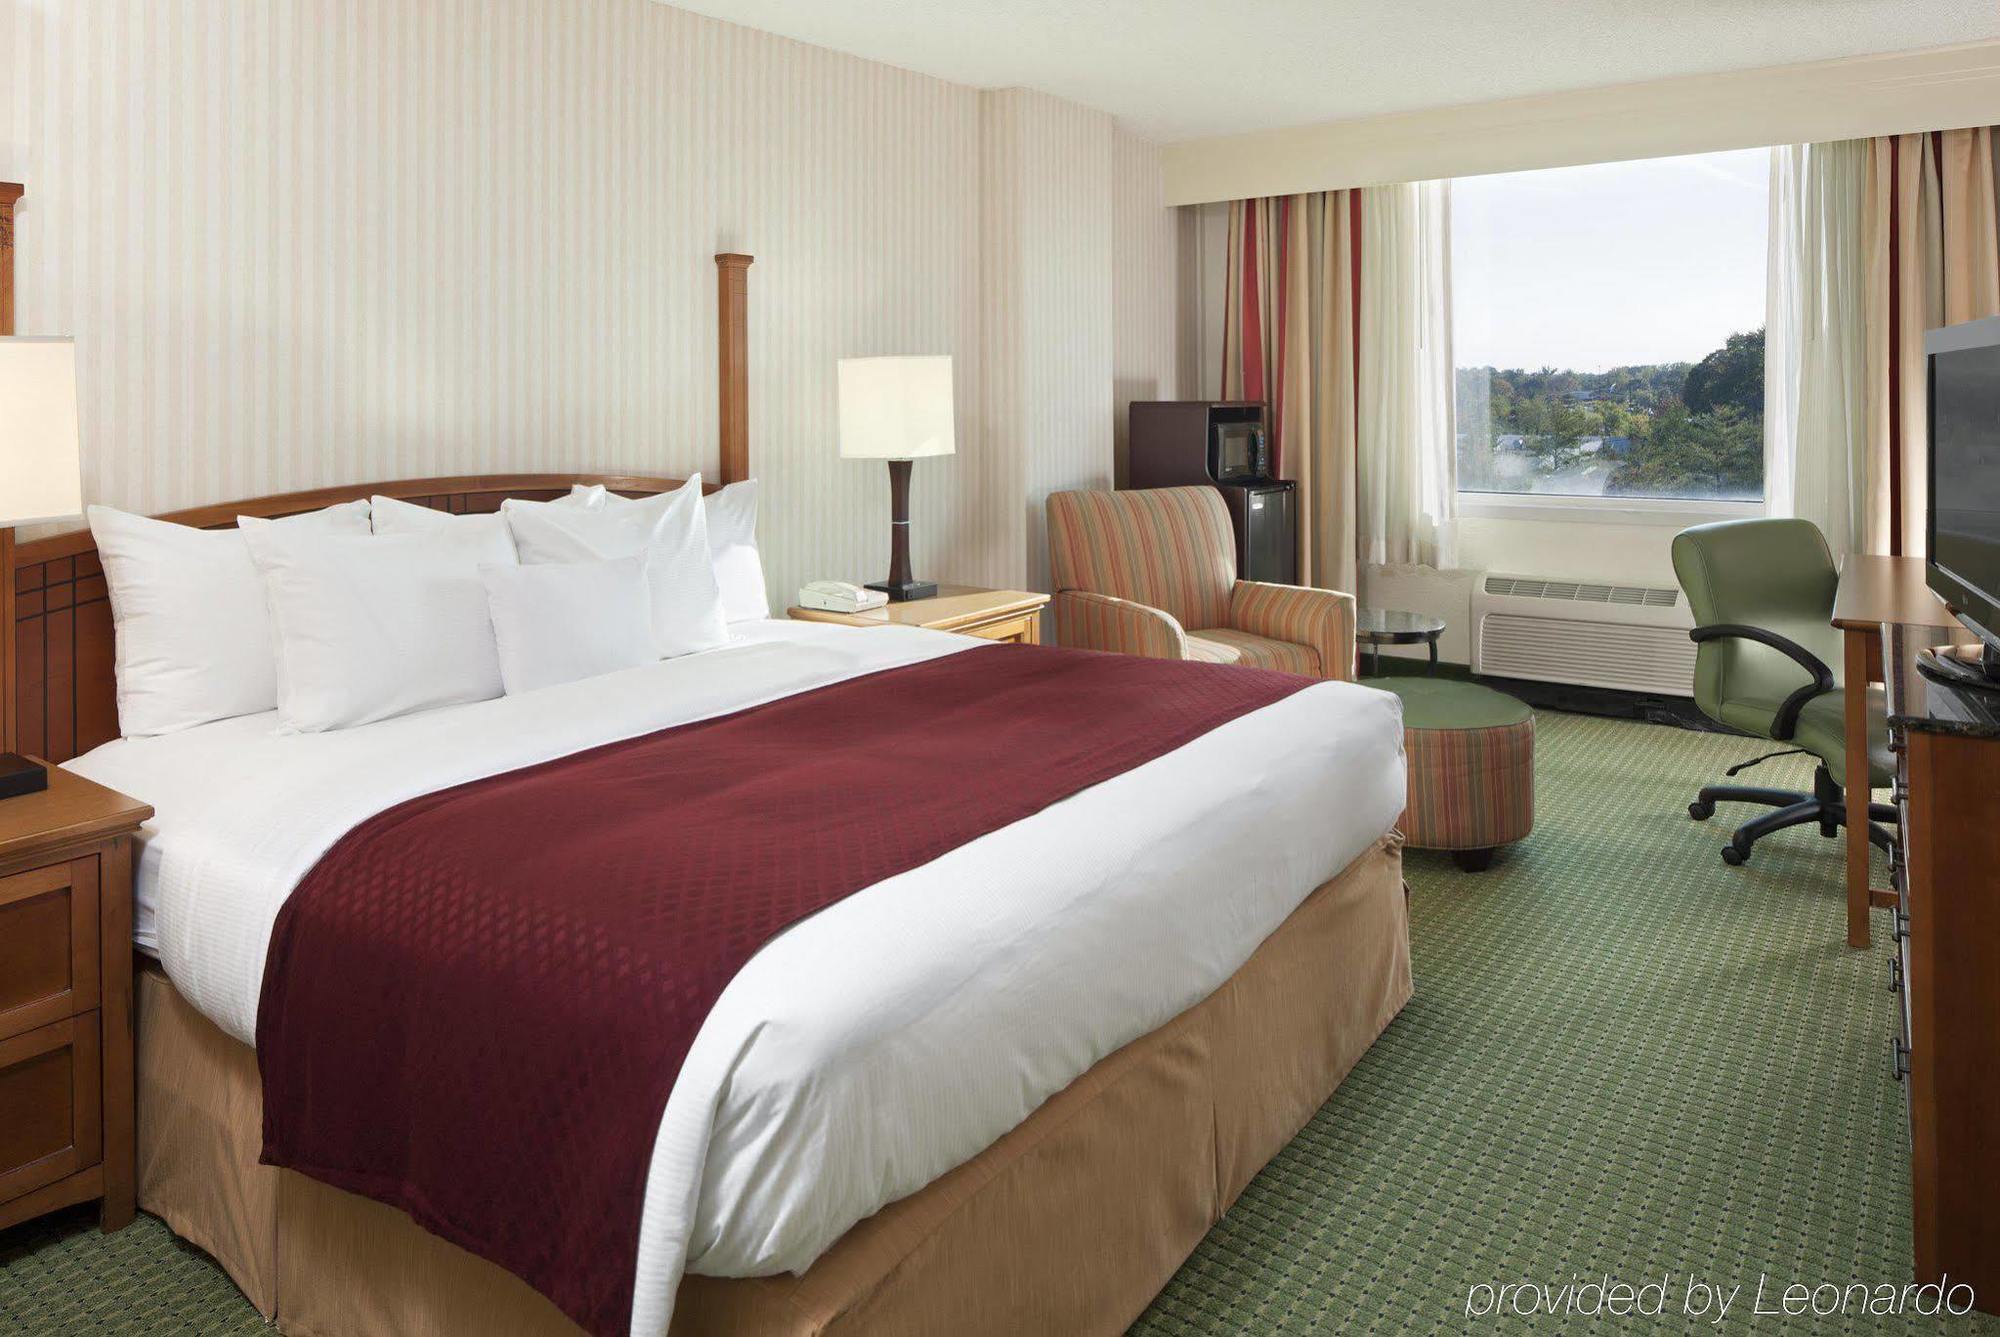 Doubletree By Hilton Hotel Annapolis Room photo